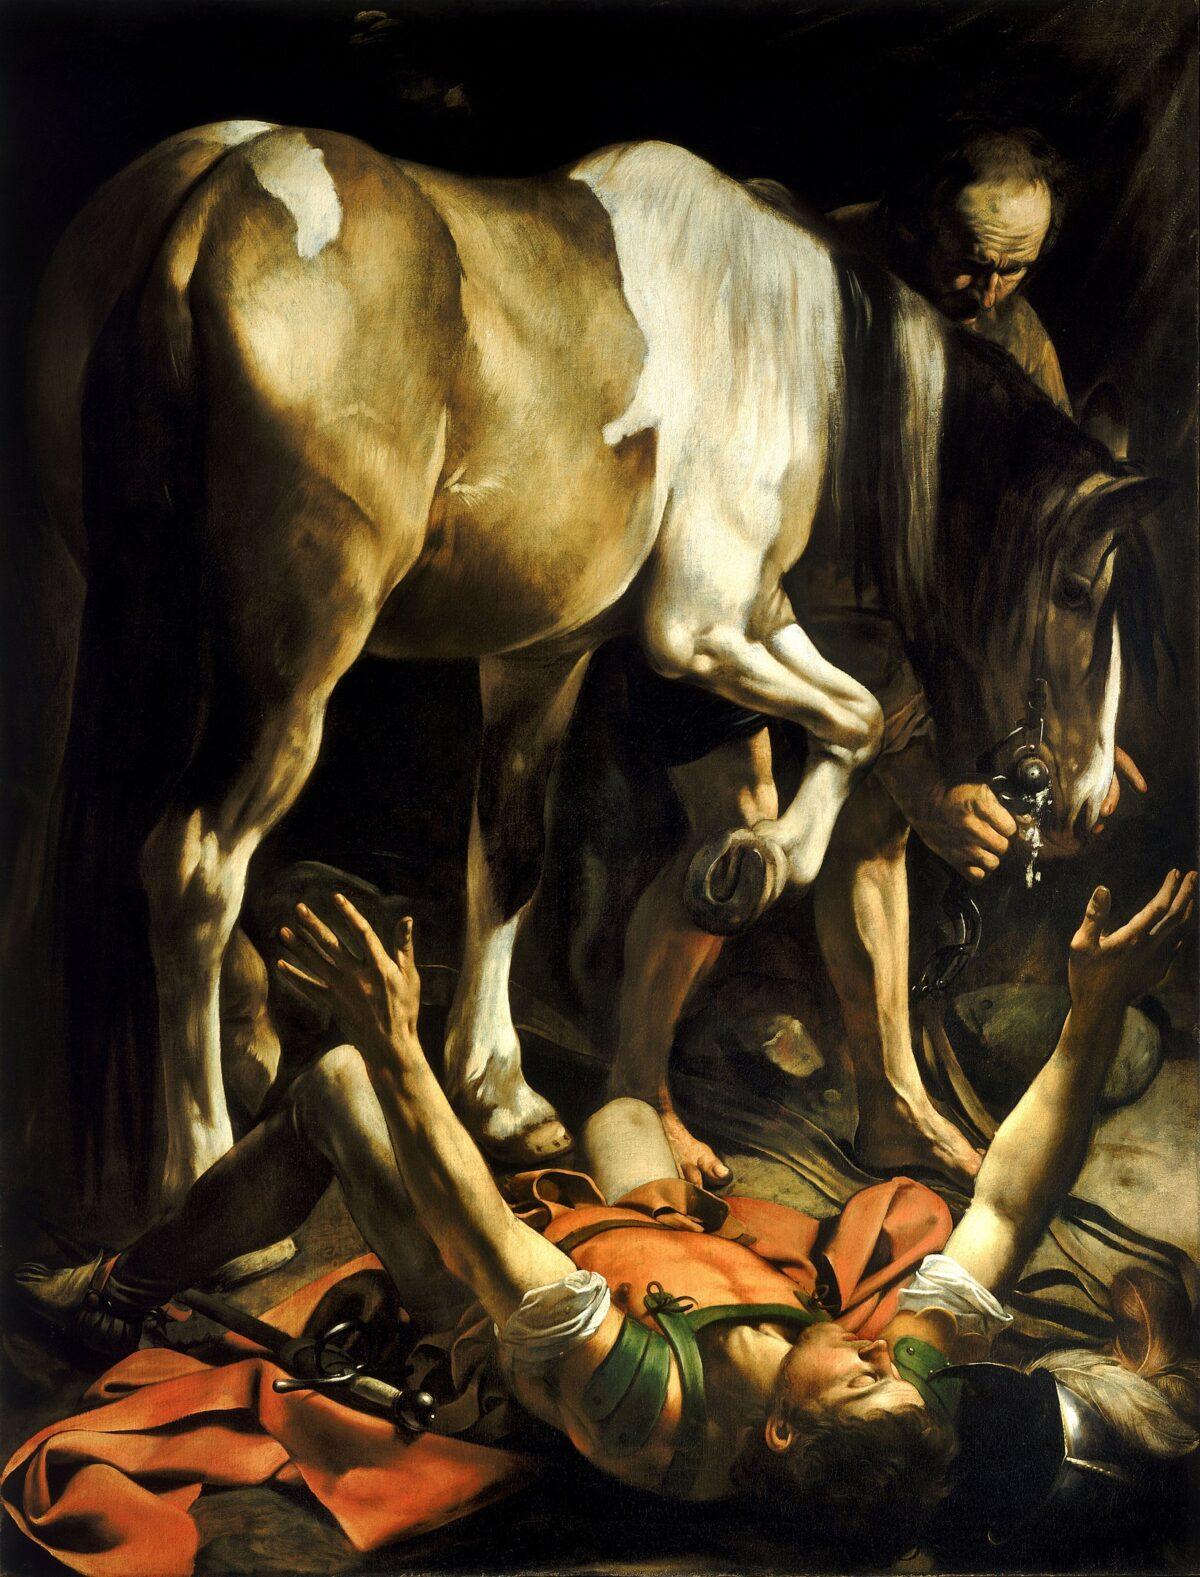 St. Paul at the moment he is blinded by God. “Conversion on the Way to Damascus,” 1601, by Caravaggio. Oil on canvas. Saint Mary of the People, Rome. (Public Domain)